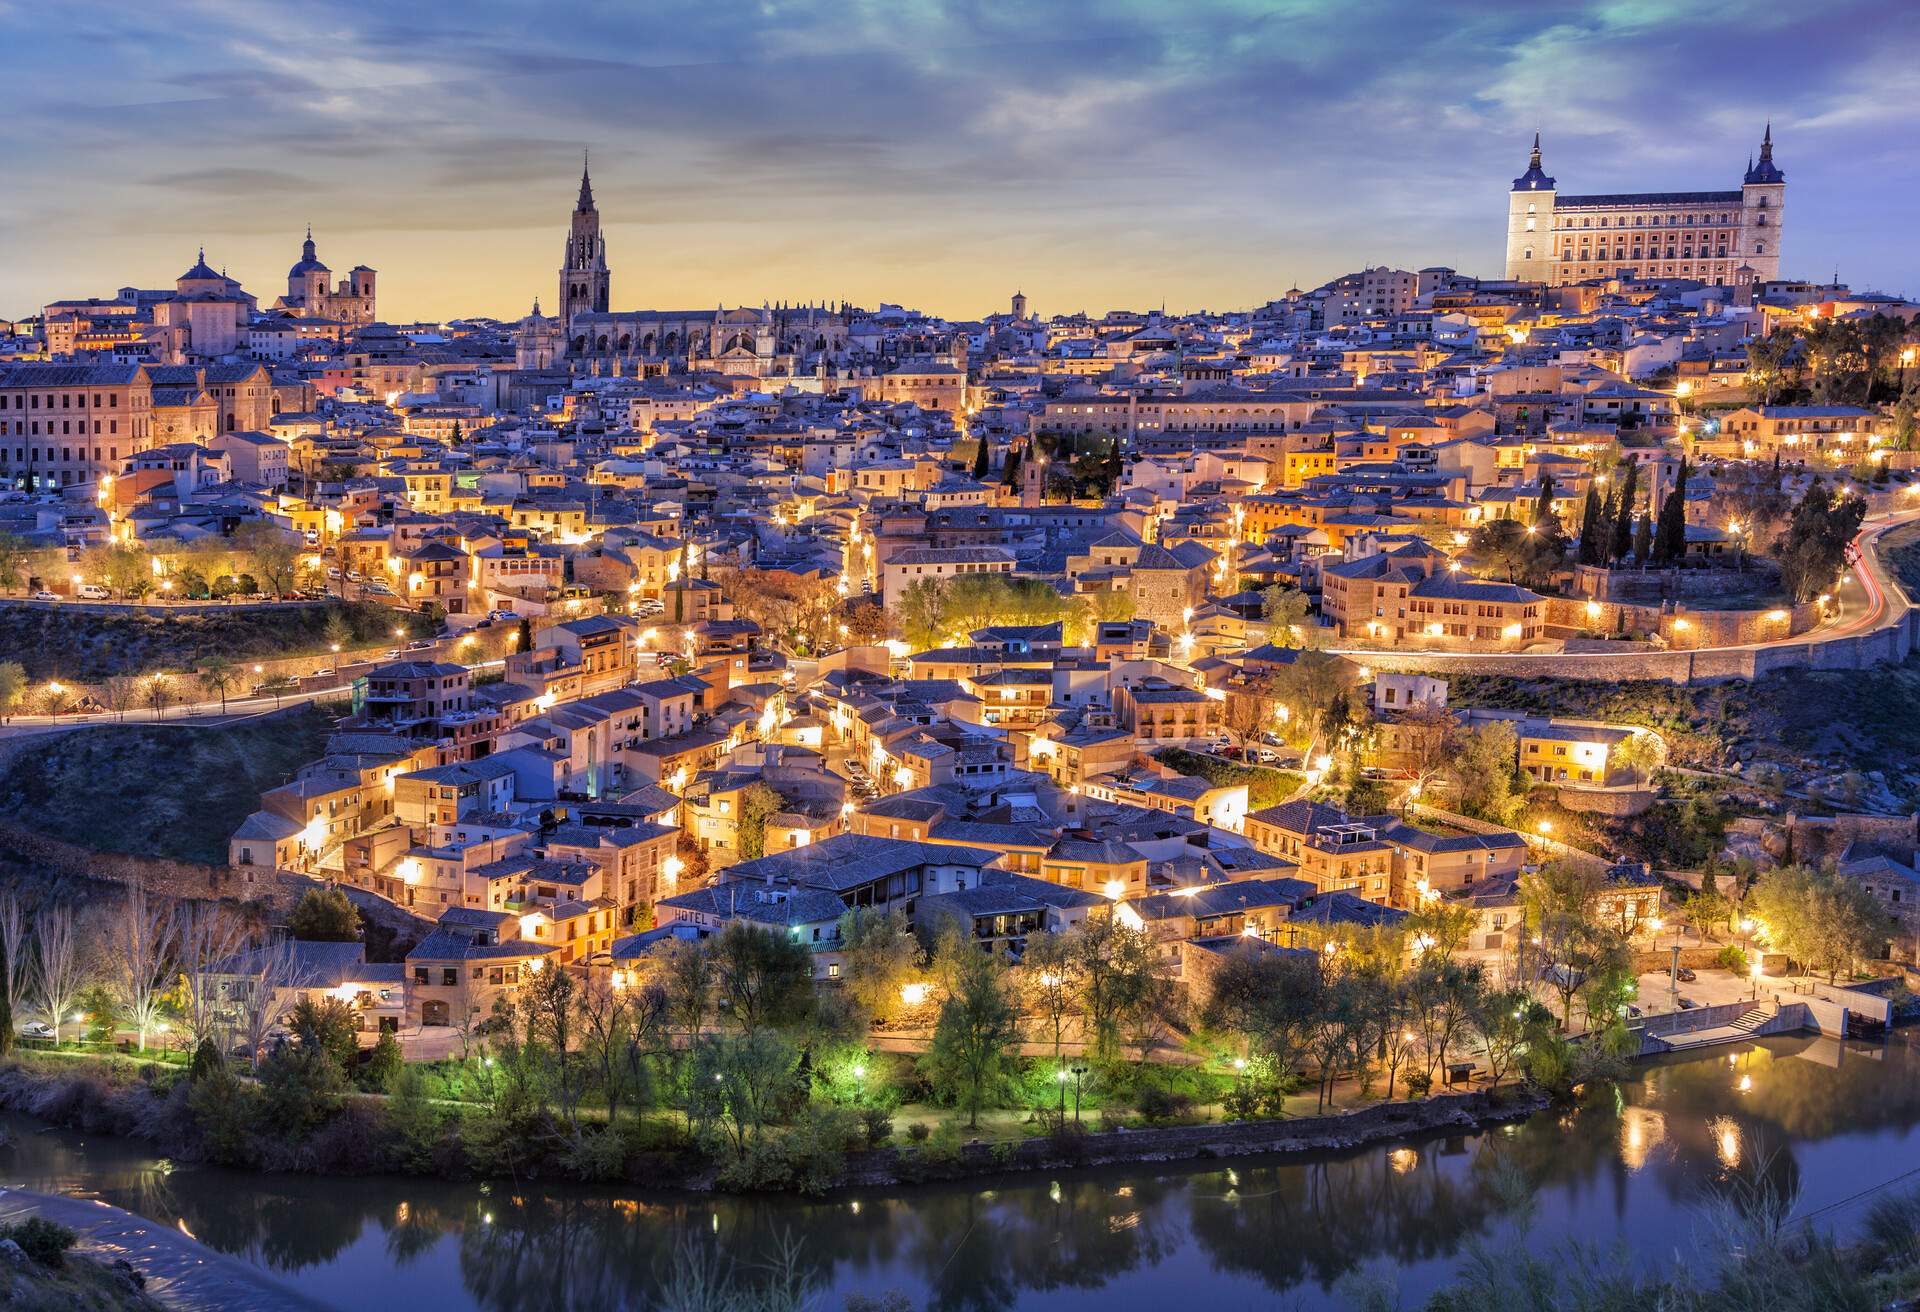 Toledo with Alcazar from the heights at dusk, with lighting and reddish sky and river.